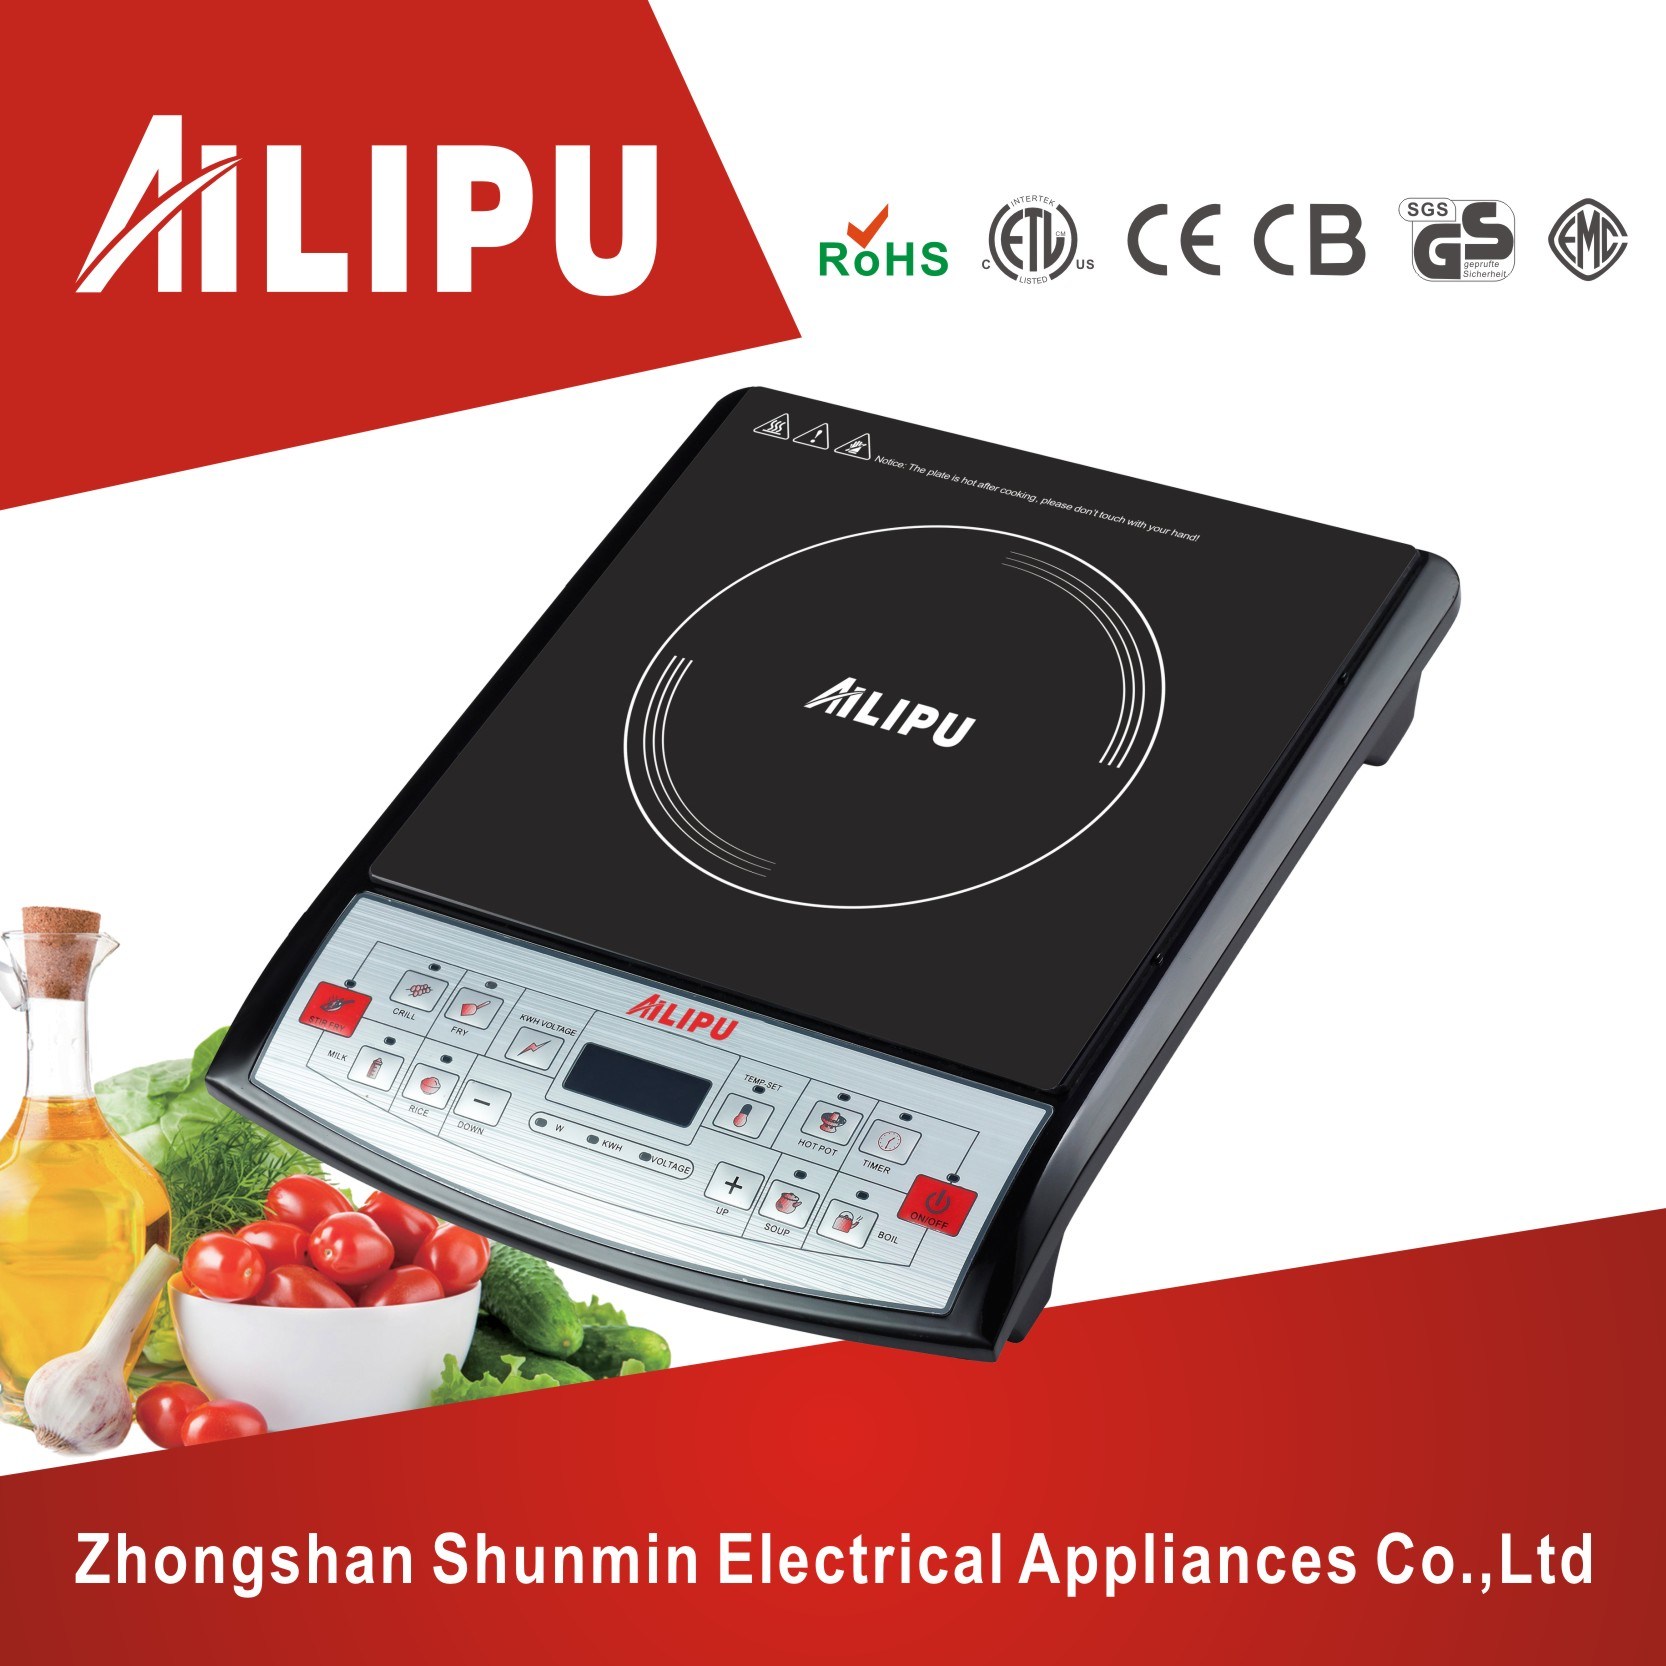 Energy Saving and High Efficiency Low Price Push-Button Induction Cooker (SM-A77)